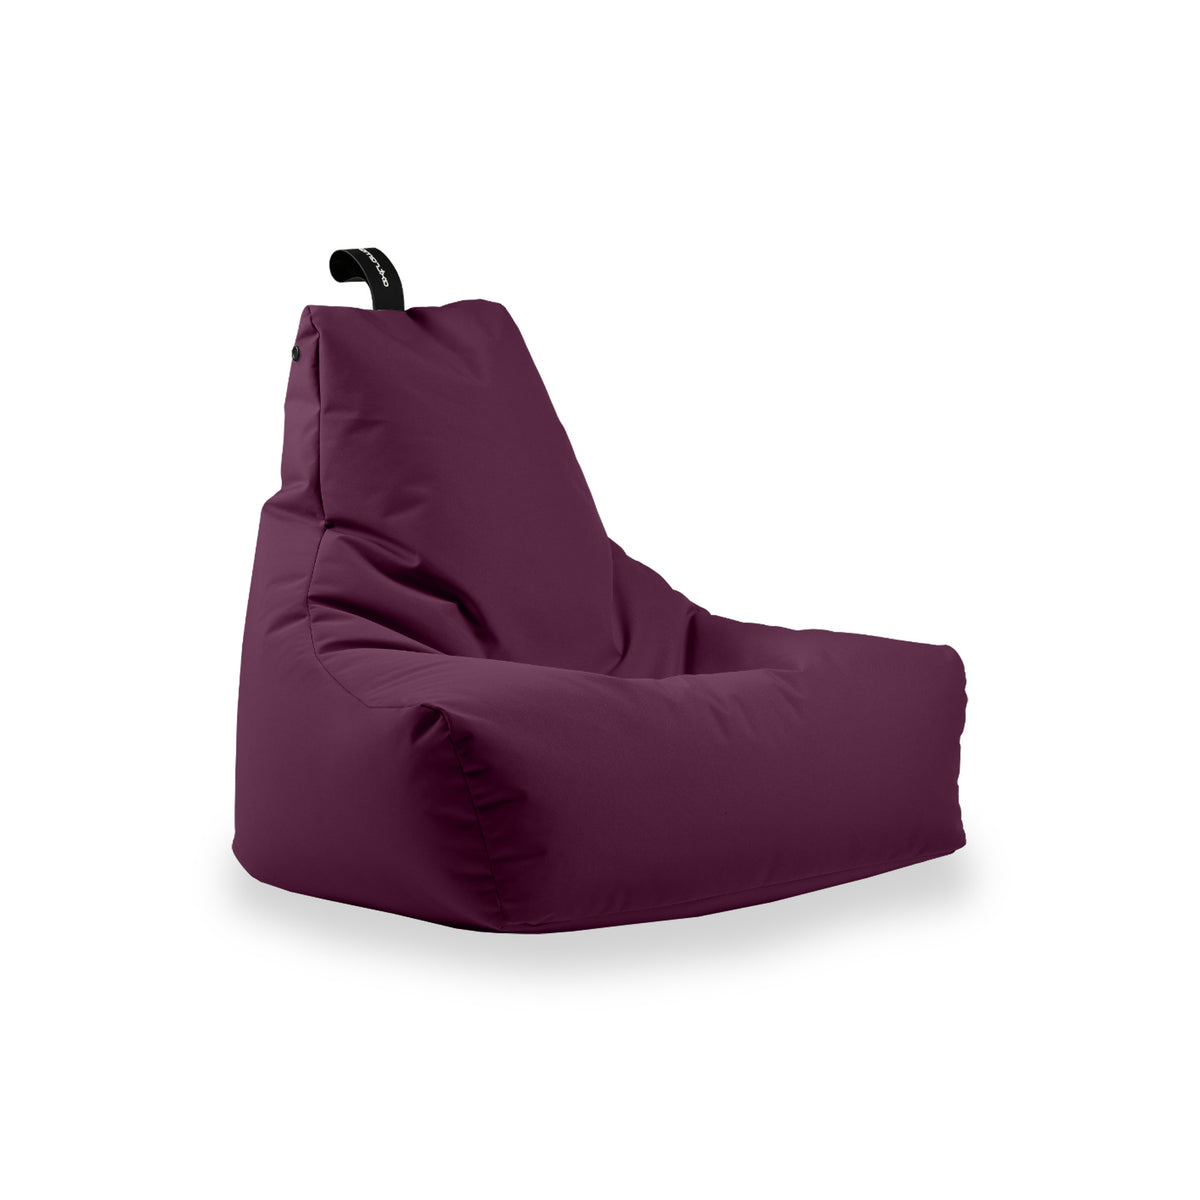 Mighty B Beanbag in Berry from Roseland Furniture